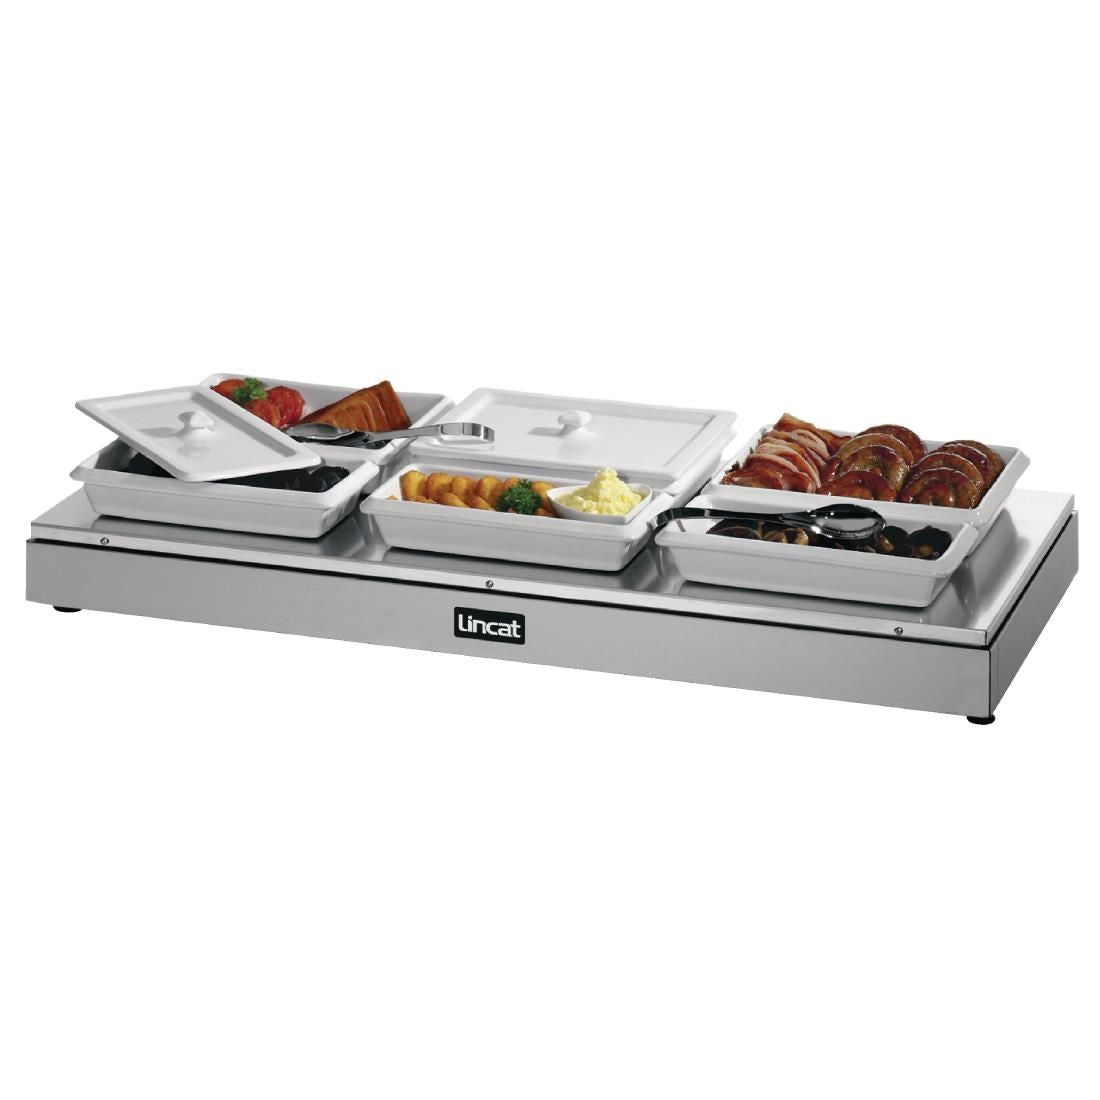 HB3 - Lincat Seal Counter-top Heated Display Base - 3 x 1/1 GN - W 1094 mm - 1.4 kW CB116 JD Catering Equipment Solutions Ltd